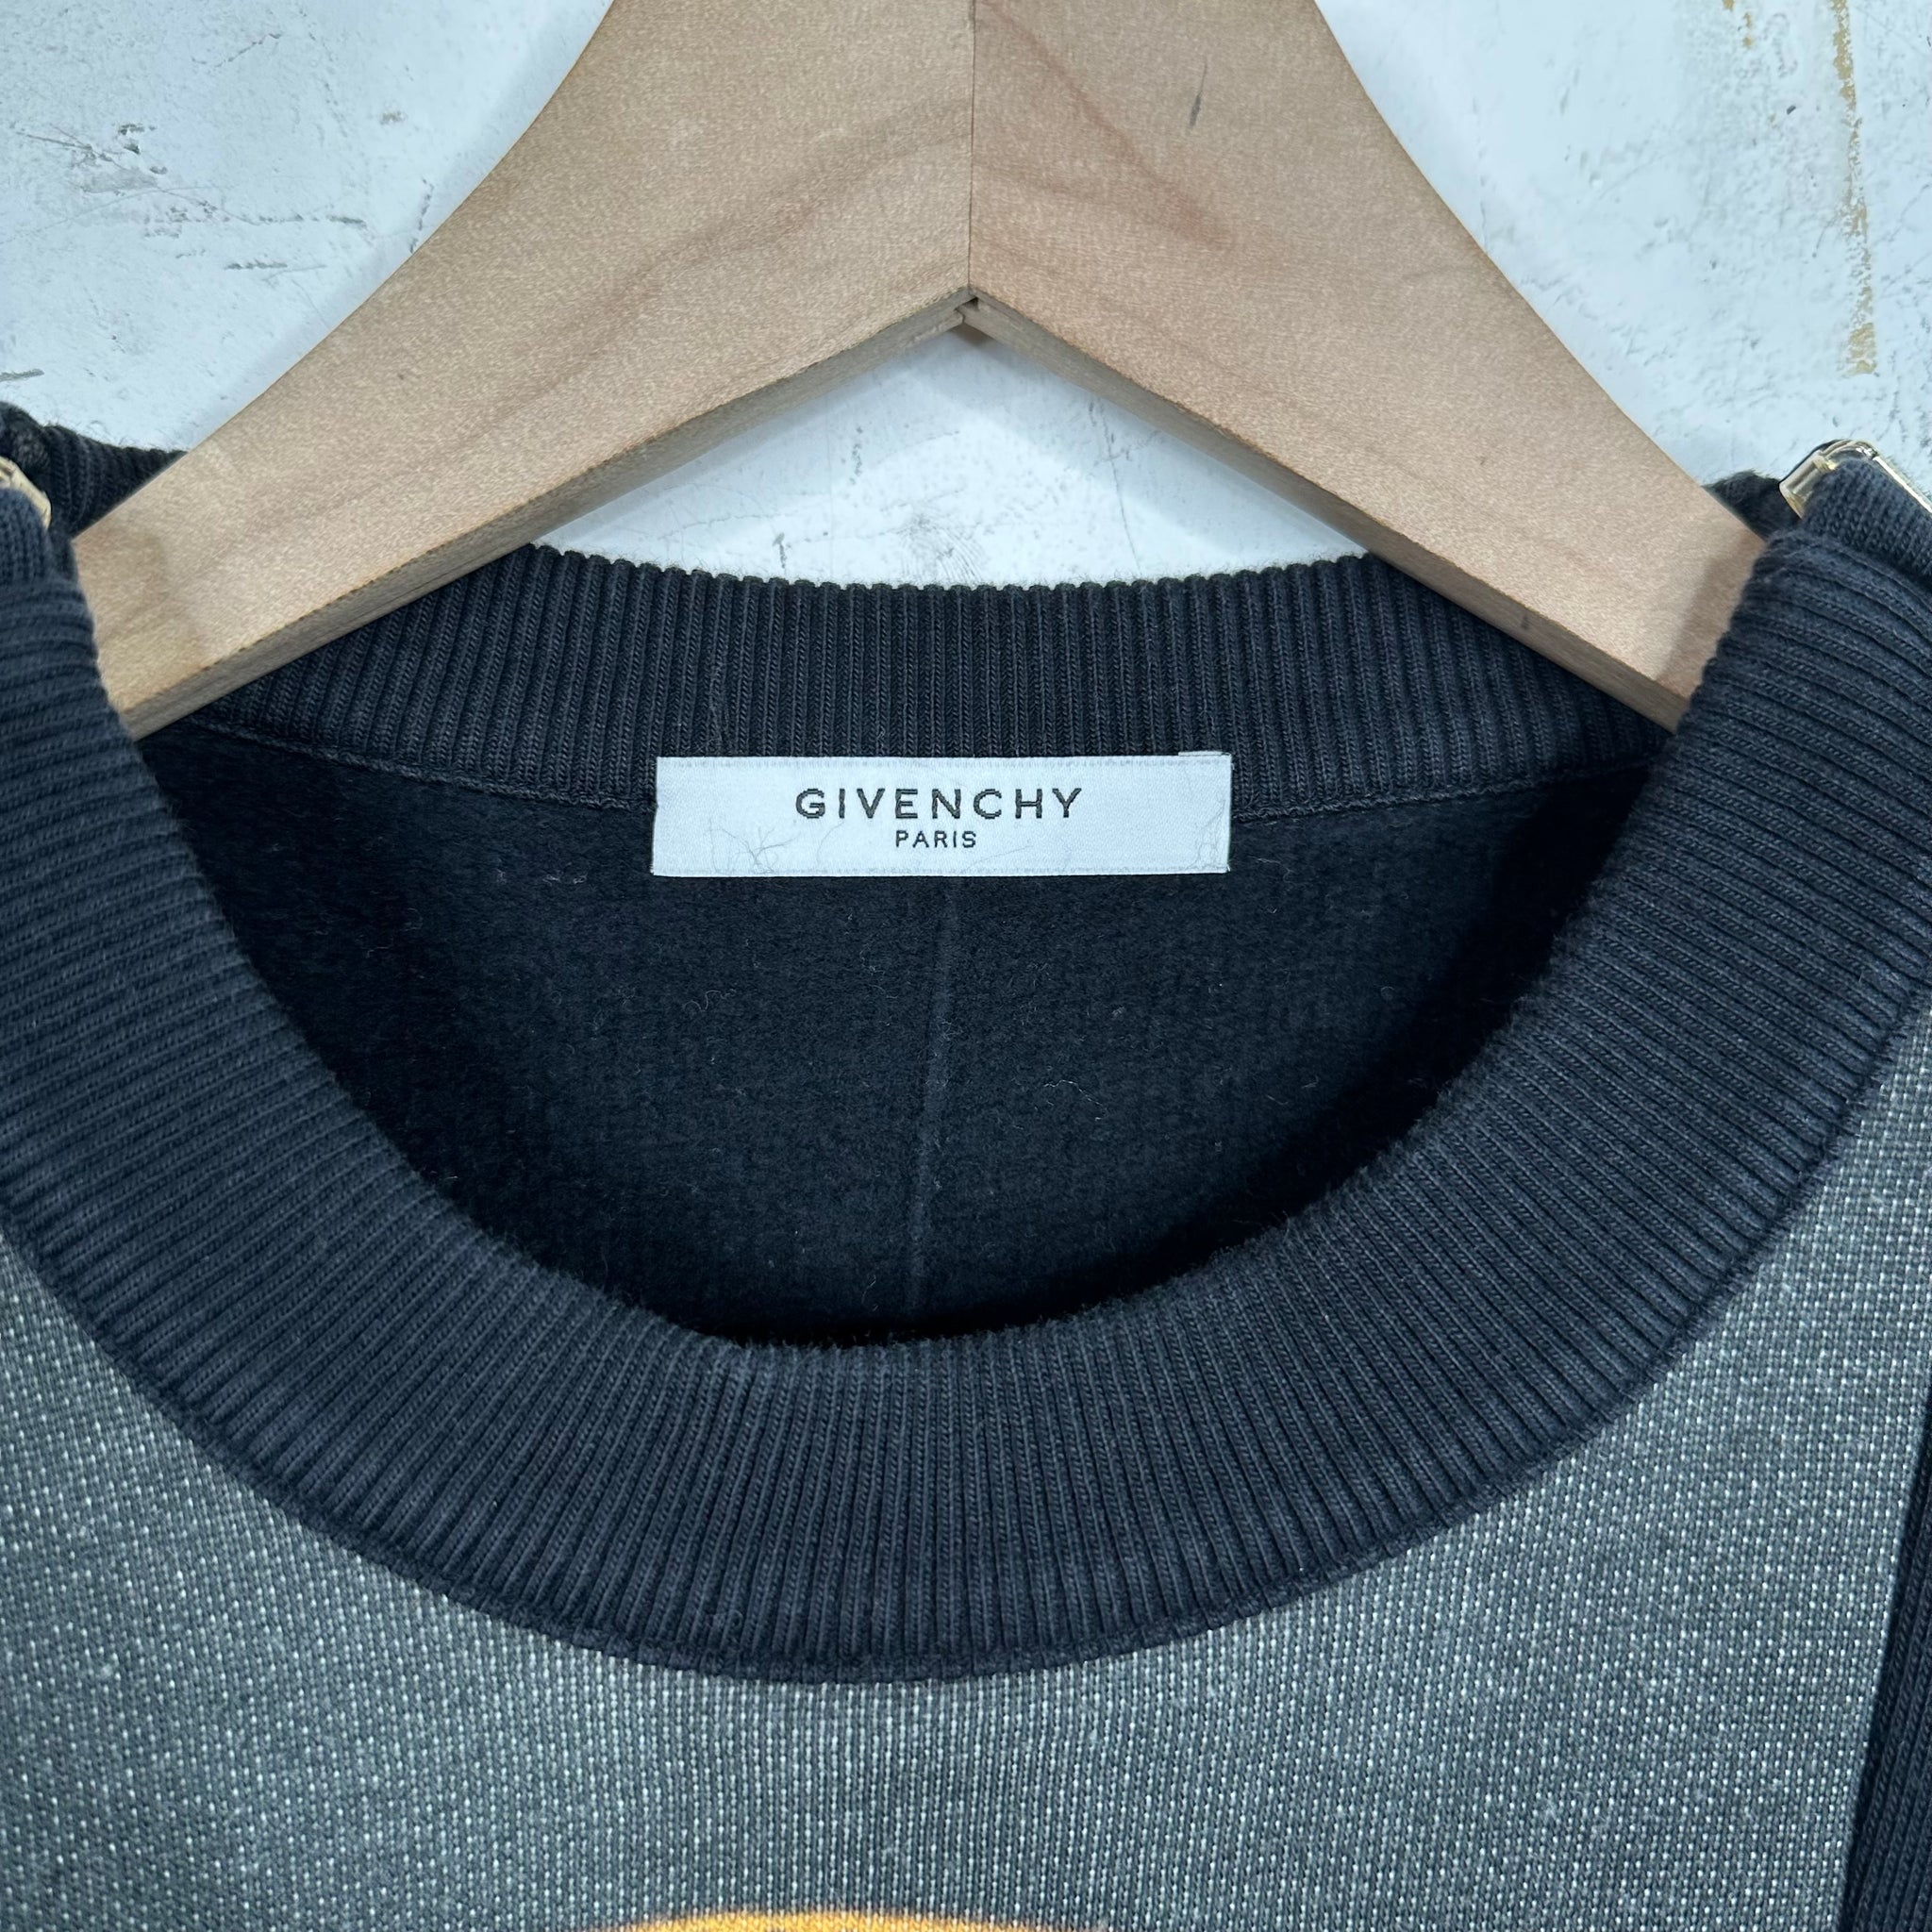 Givenchy American Dream Reconstructed Crewneck